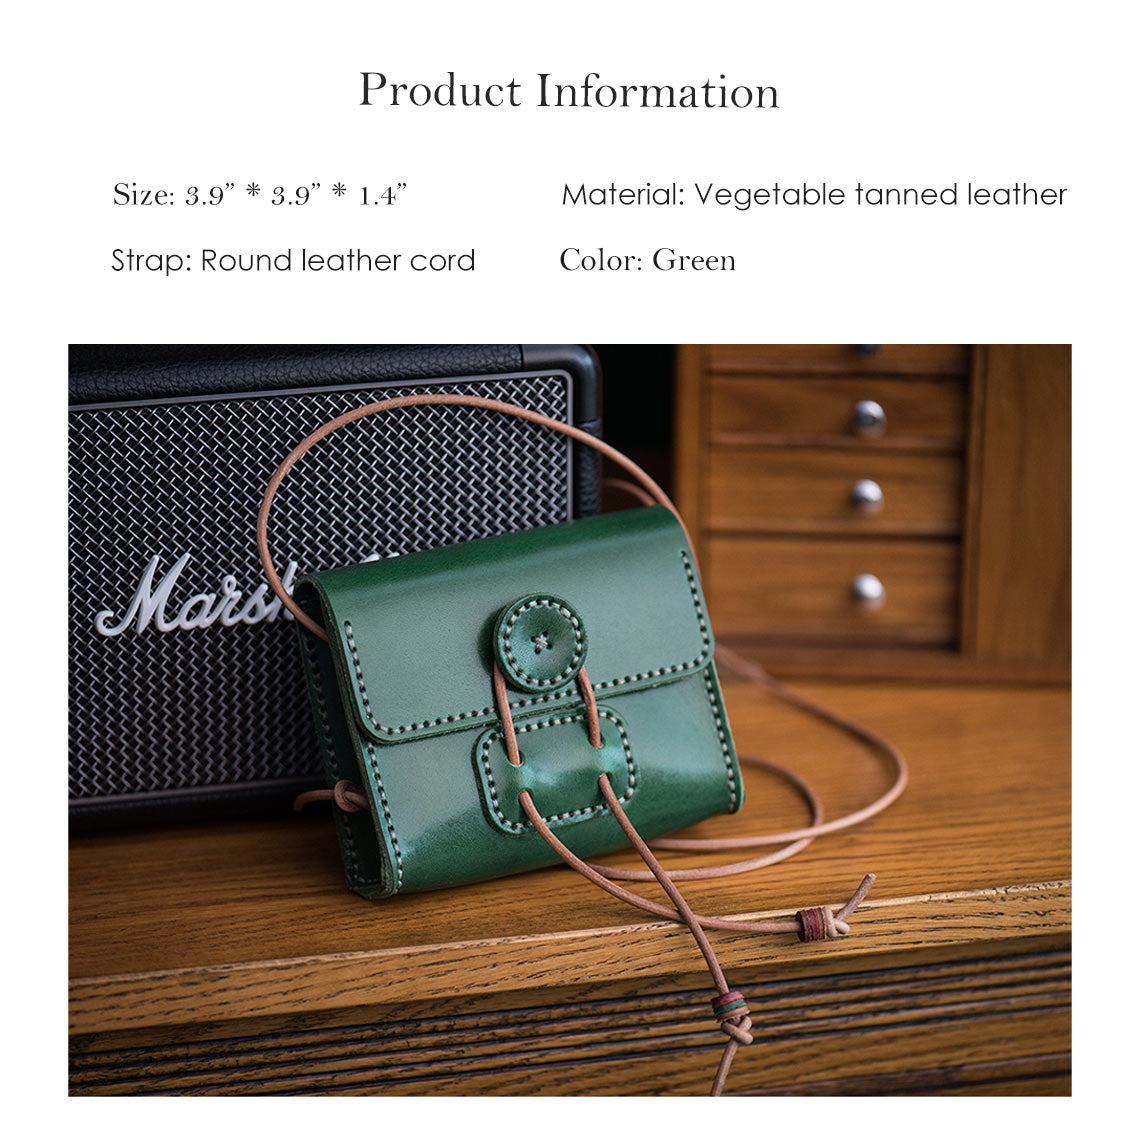 Product Information of Mini Green Bag | Easy DIY Leather Bags - POPSEWING™